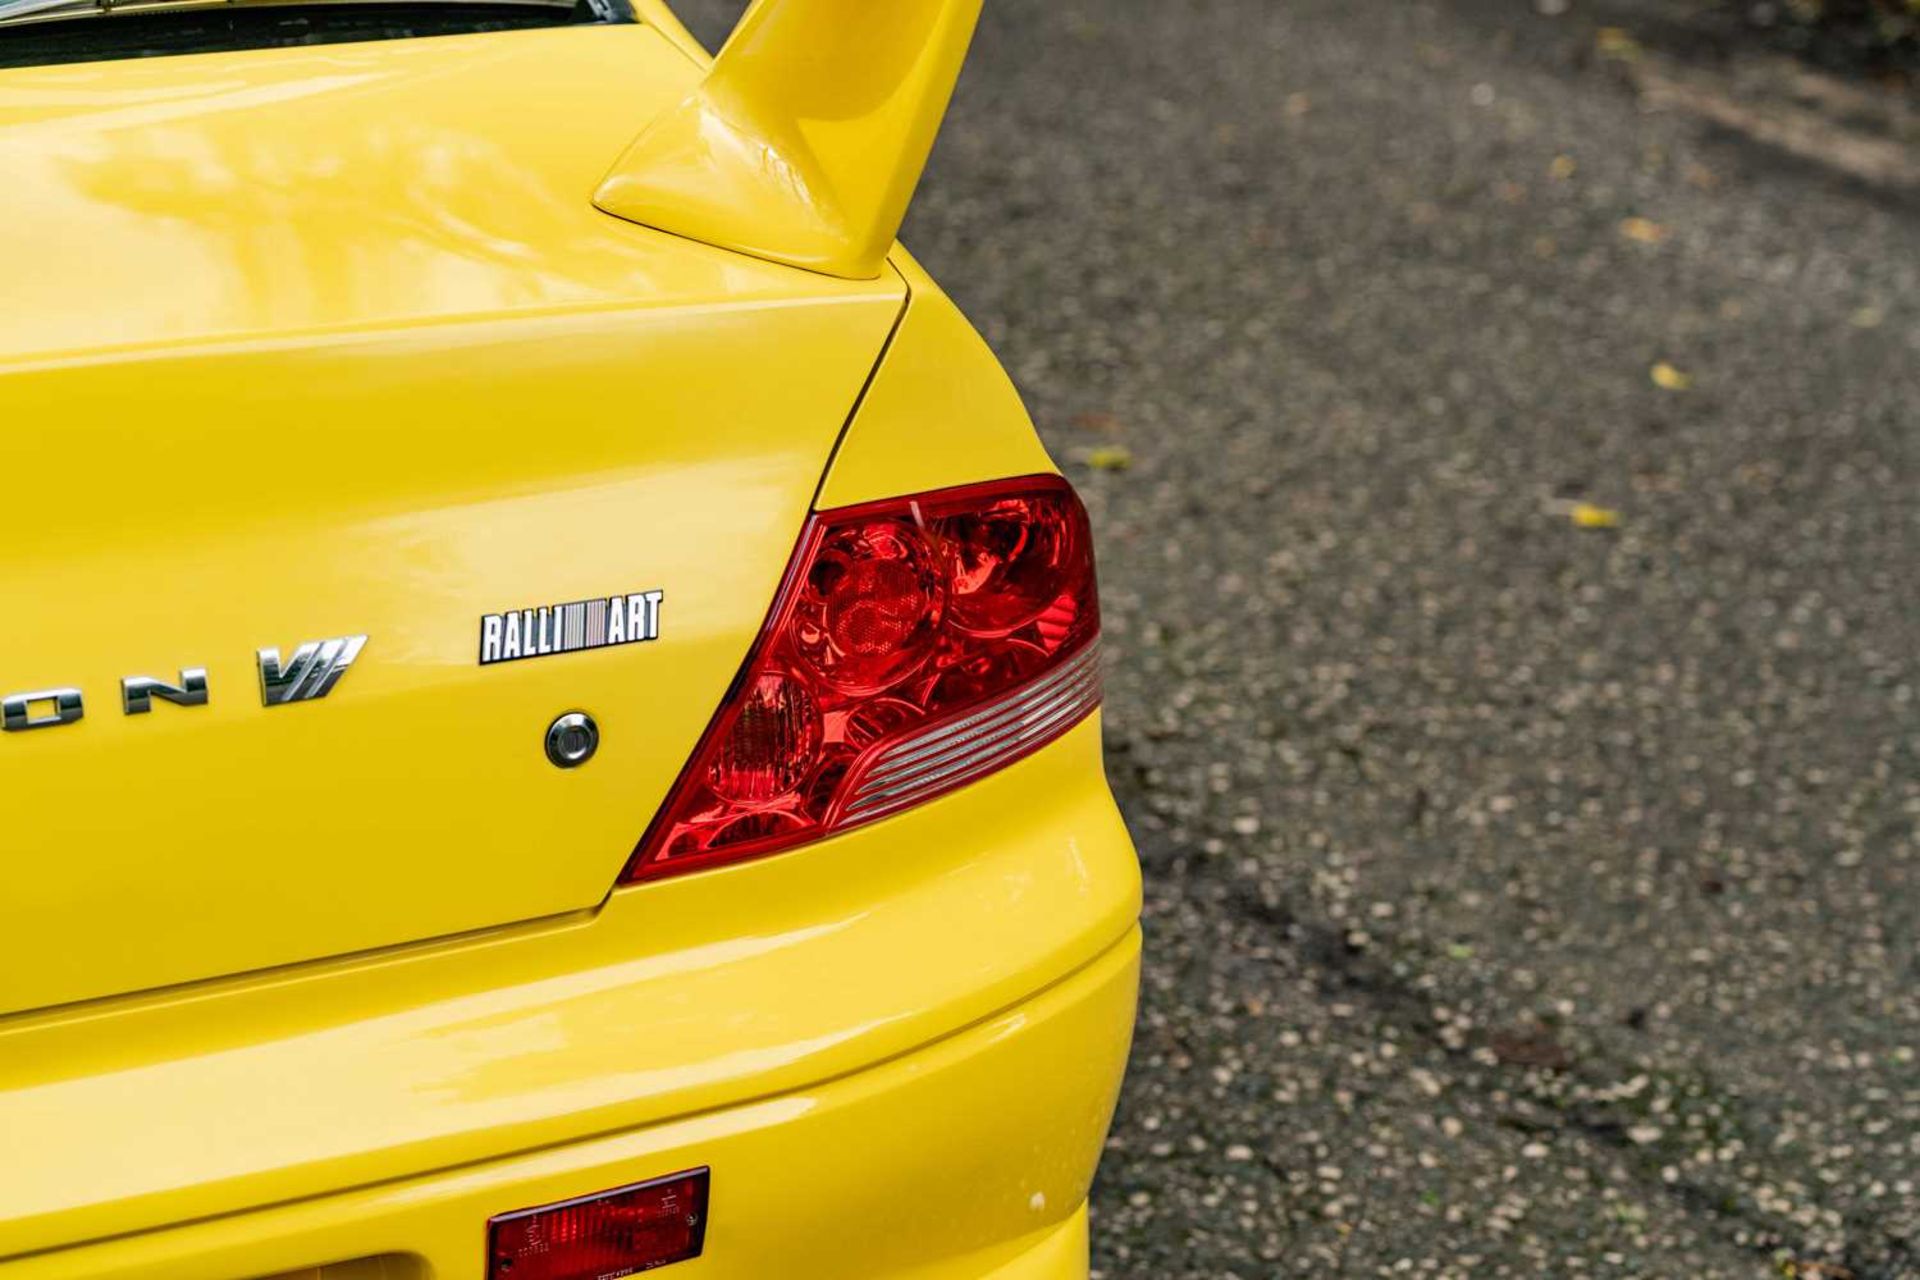 2001 Mitsubishi Lancer Evolution VII Subtly upgraded and previous long-term (seventeen year) ownersh - Image 30 of 64